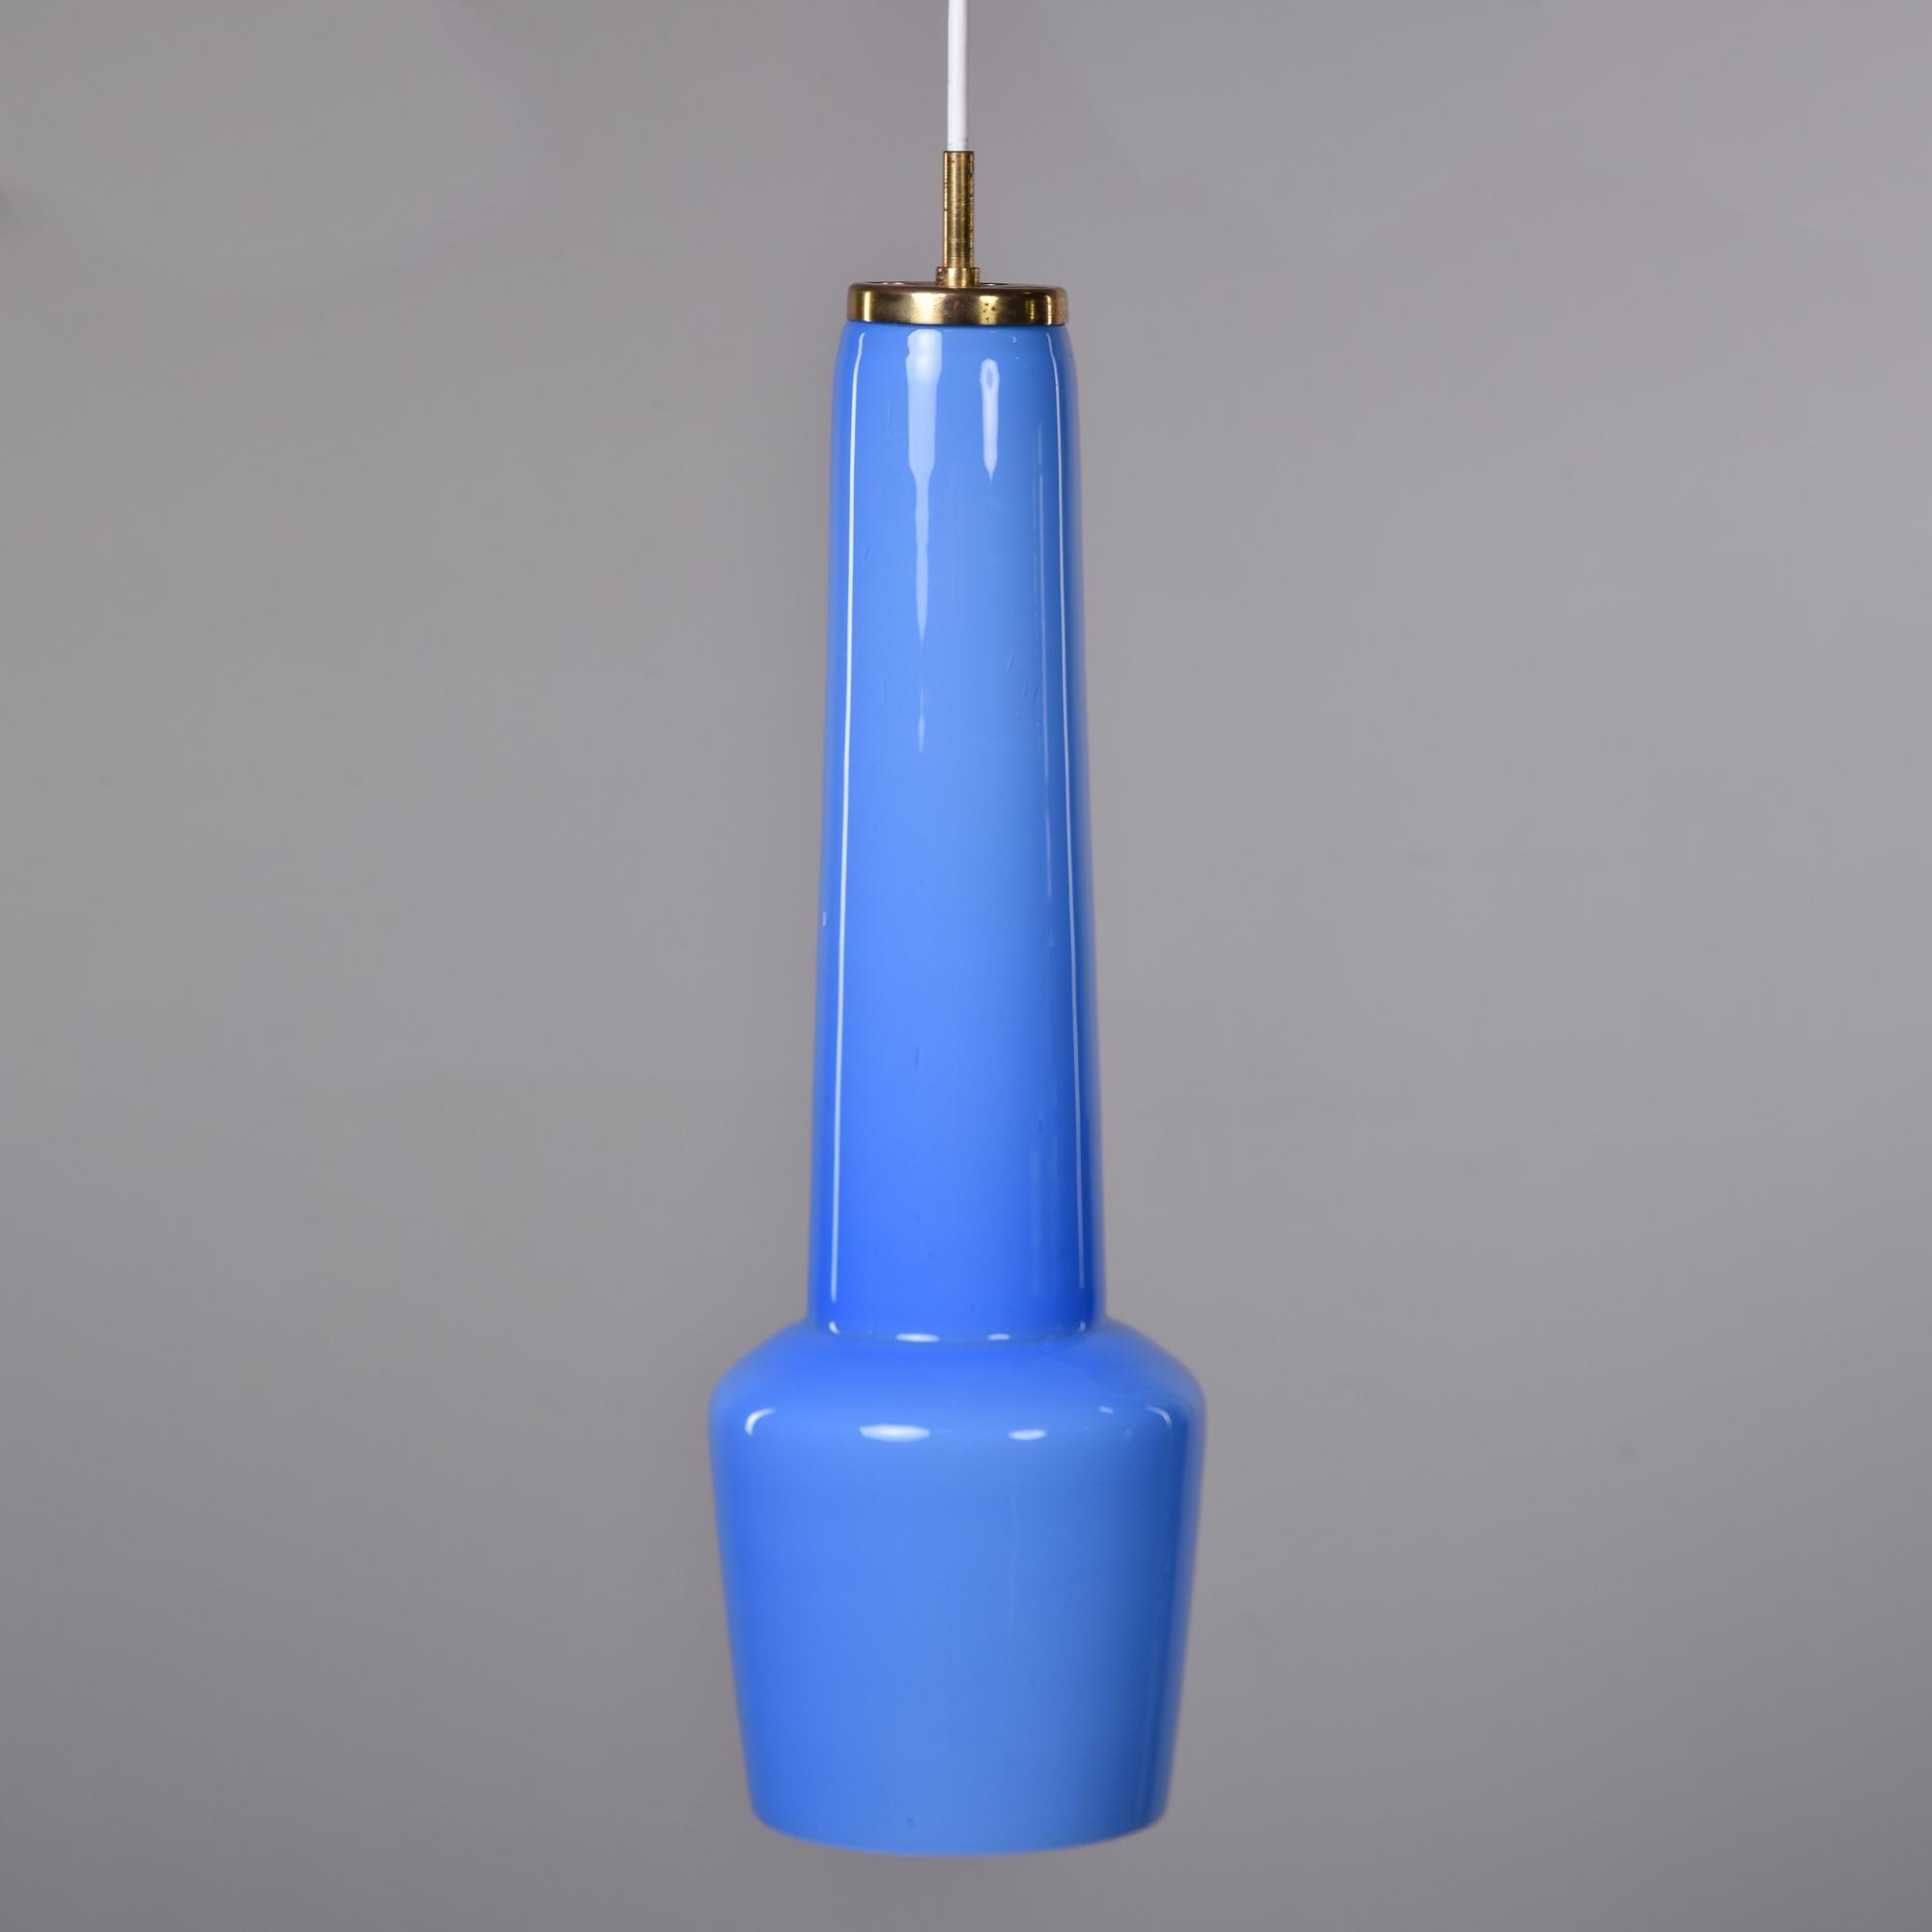 Found in Italy, this circa 1960 elongated glass pendant light by Stilnovo is a vibrant shade of periwinkle blue. Internal standard sized single socket has been rewired for US electrical standards. Brass canopy - top of fixture has manufacturer’s